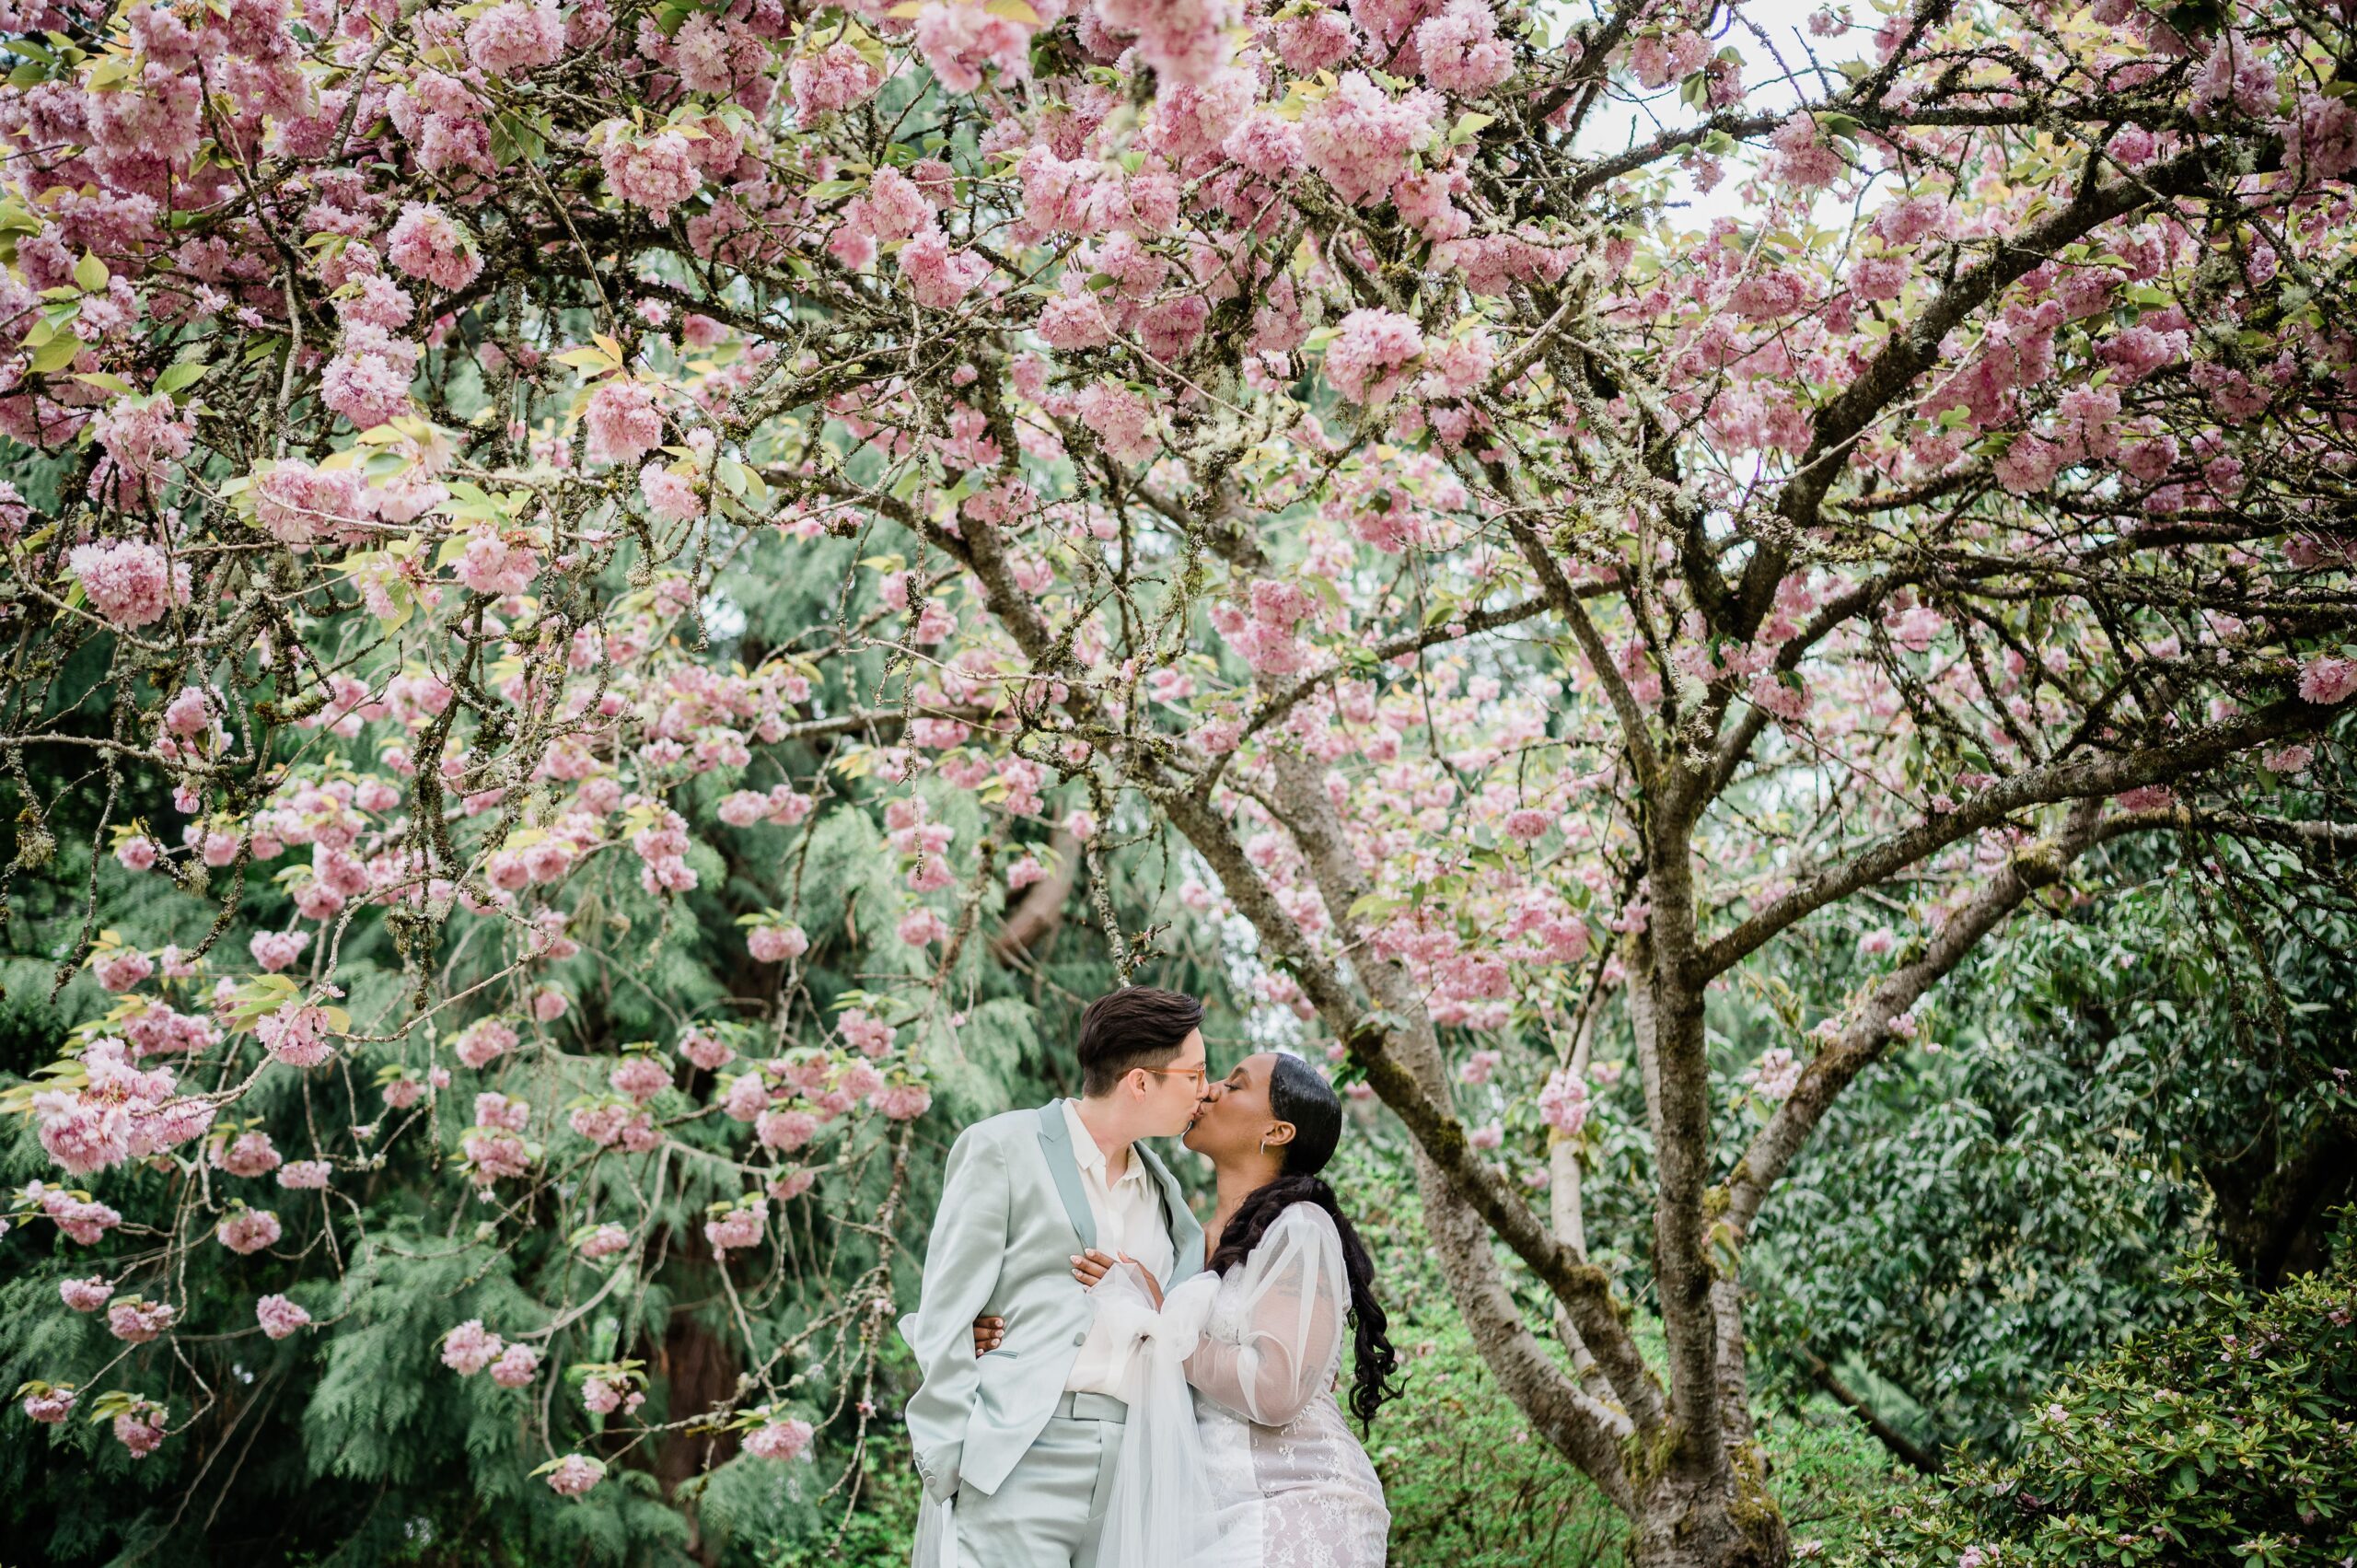 LGBTQ+ couple kissing under the cherry blossom tree in Seattle, WA.